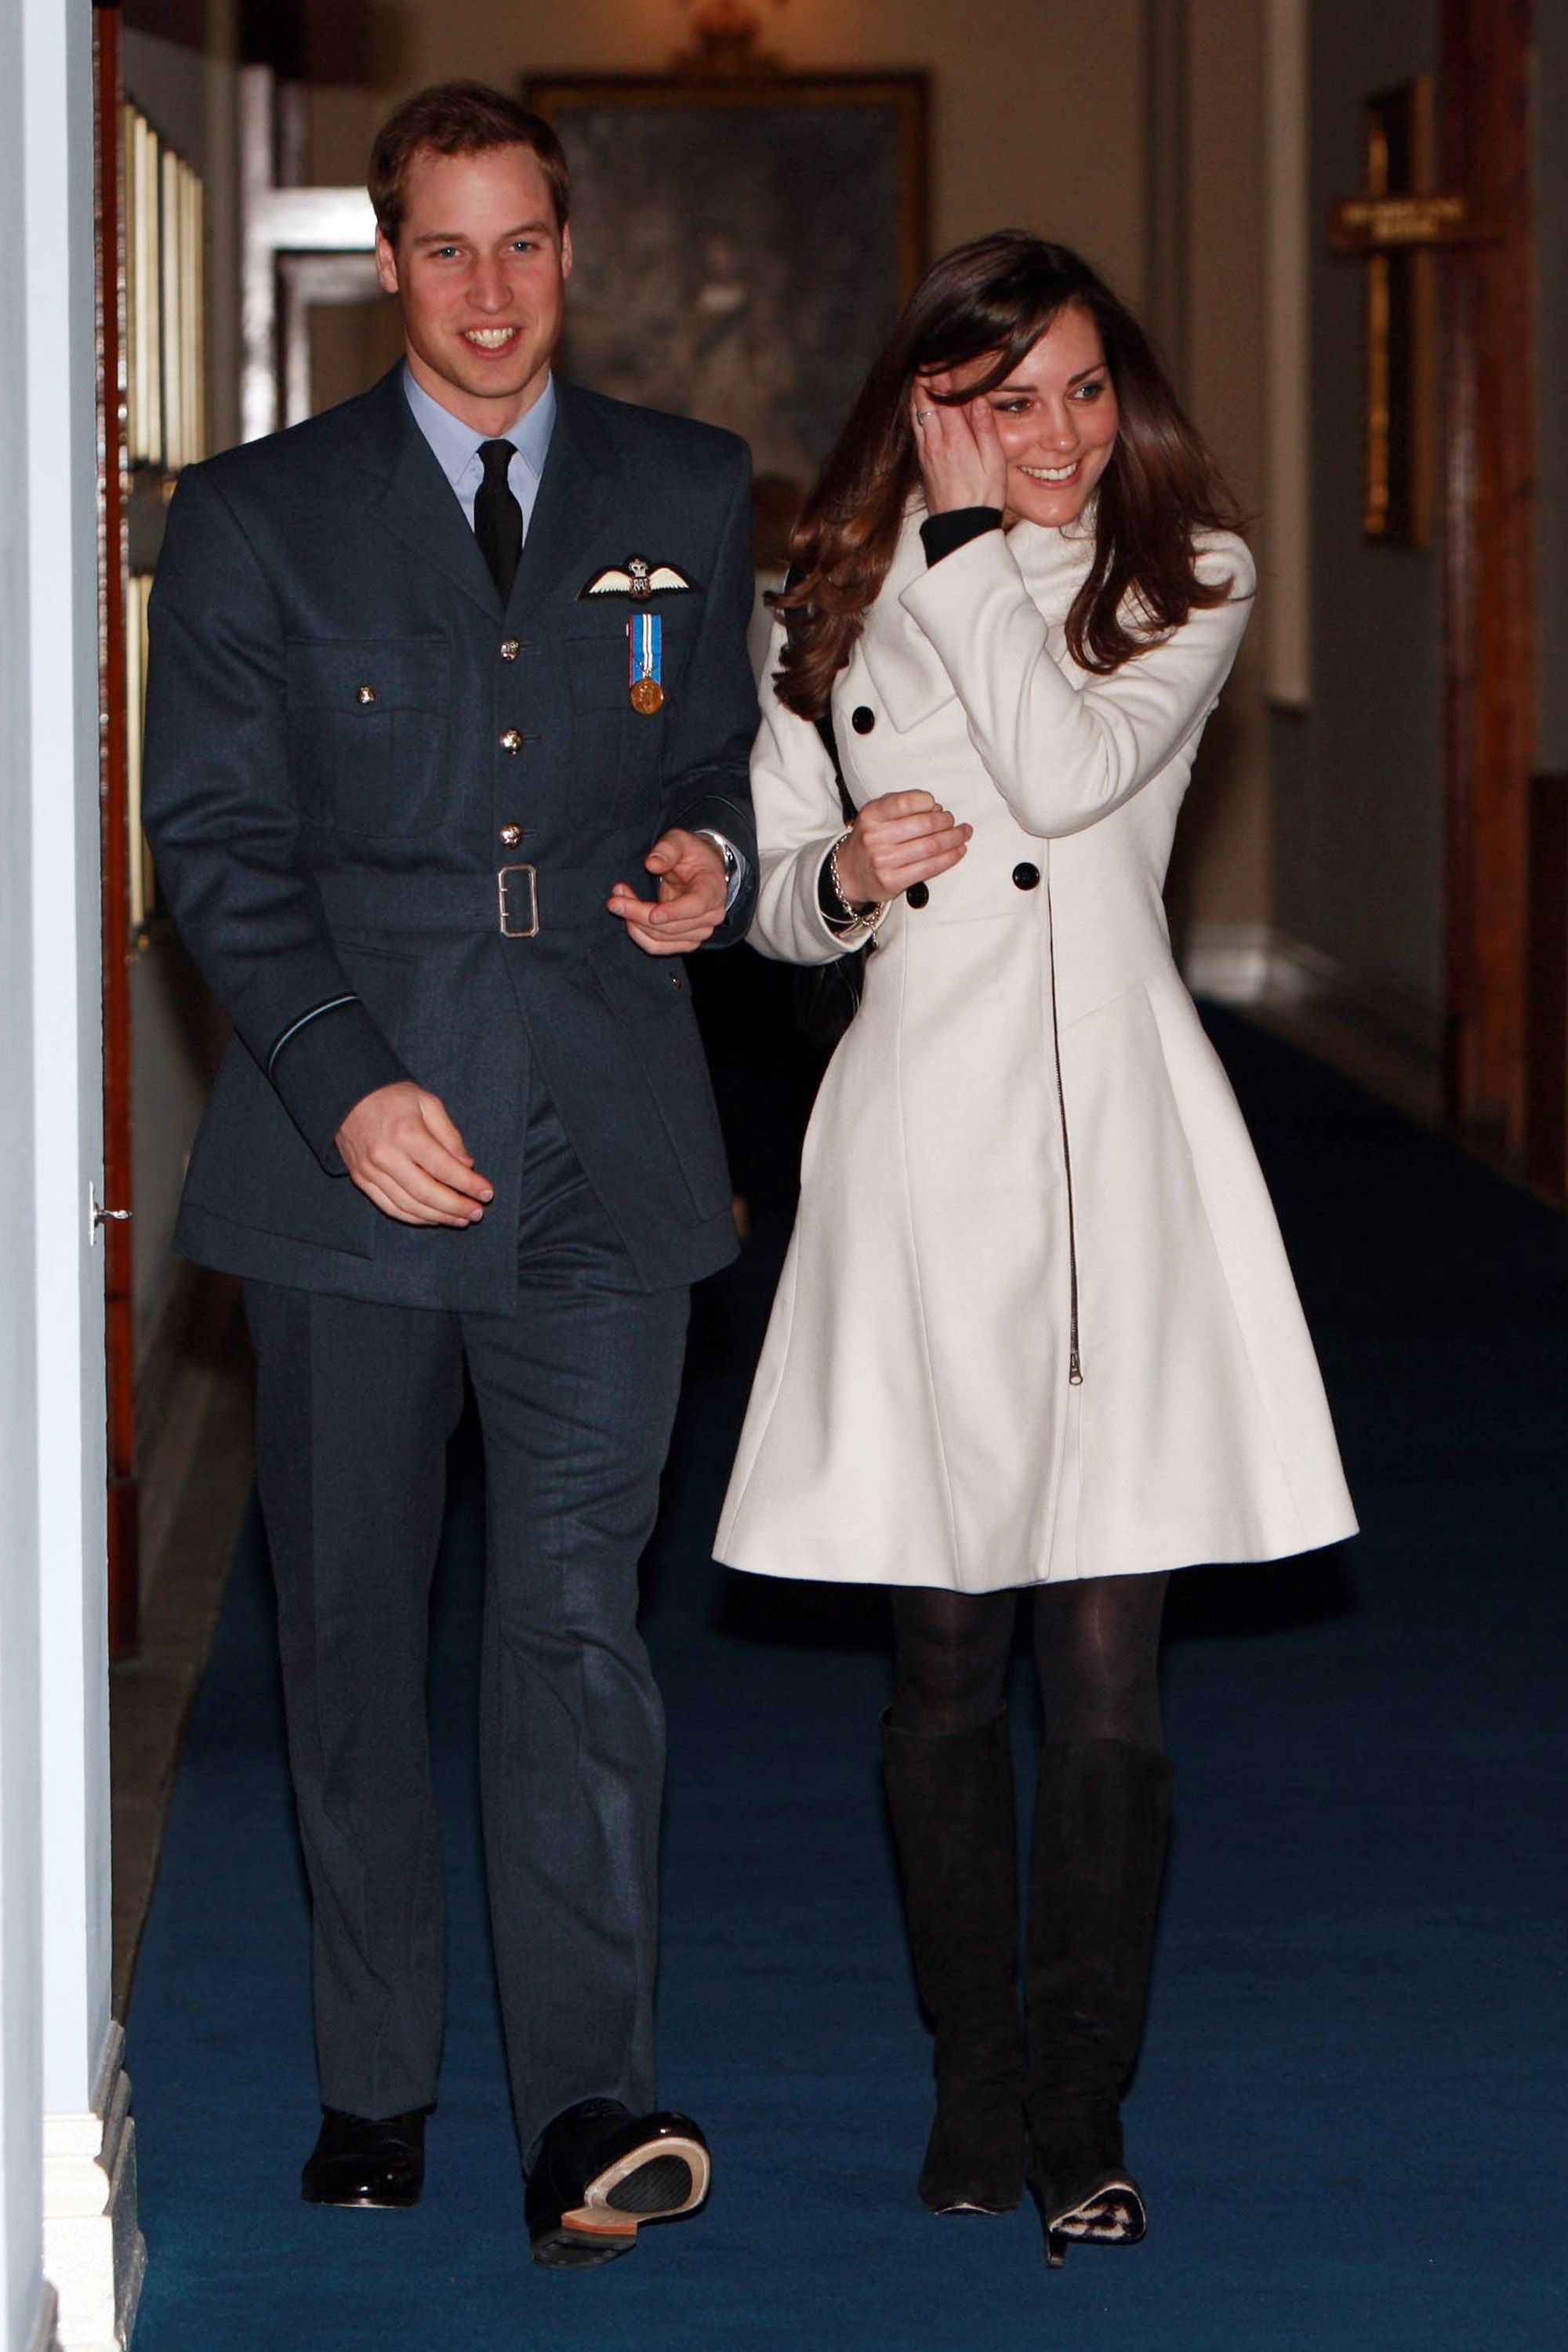 Prince William with his girlfriend Kate Middleton after his graduation ceremony at RAF Cranwell on April 11, 2008, in Cranwell, England | Photo: Pool/Anwar Hussein Collection/WireImage/Getty Images